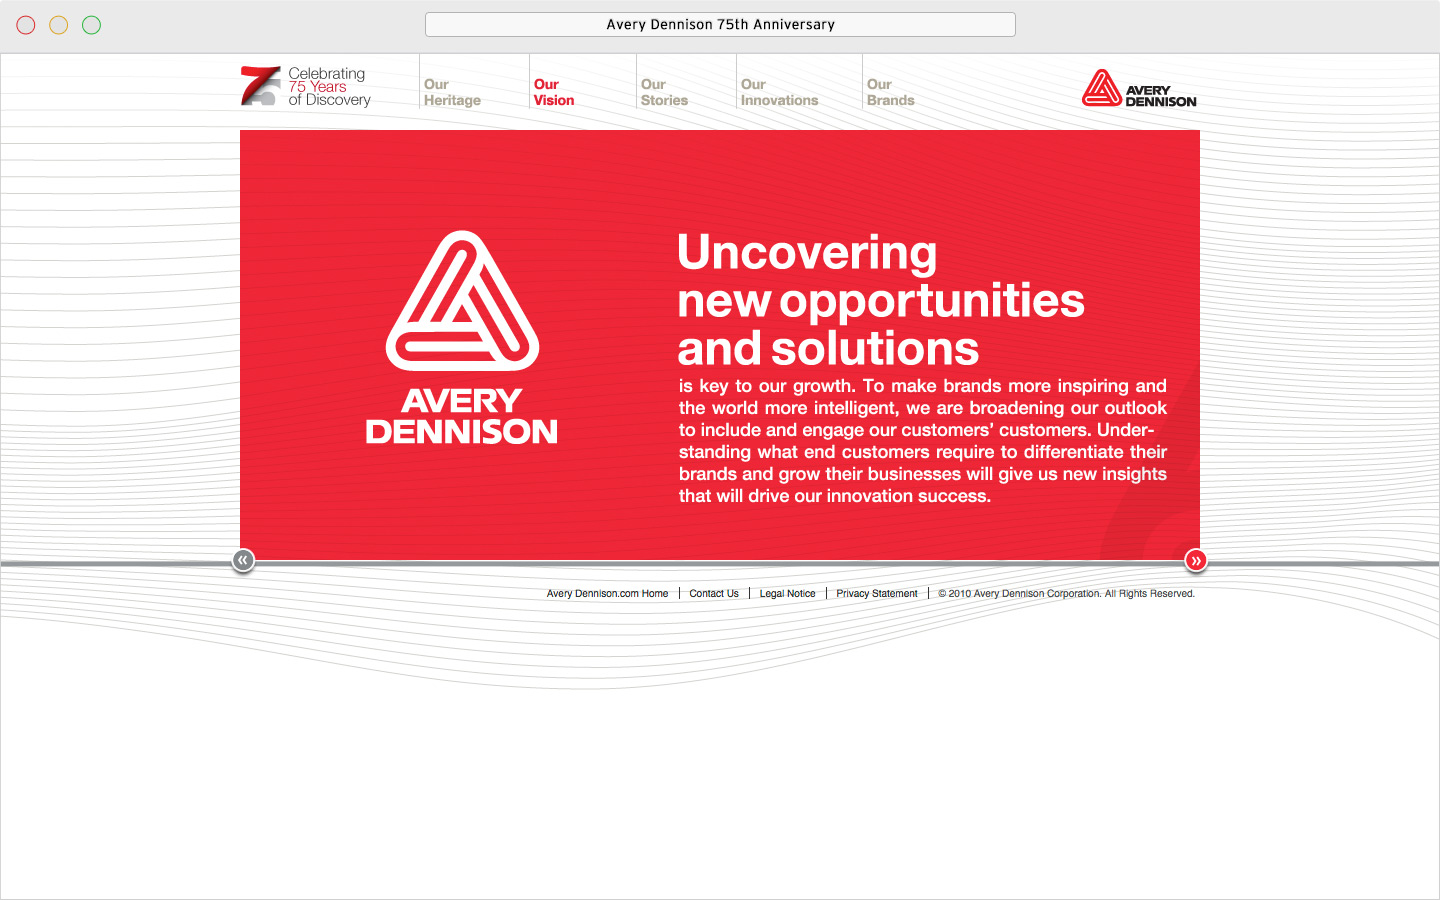 Avery Dennison 75th anniversary microsite Our Vision page